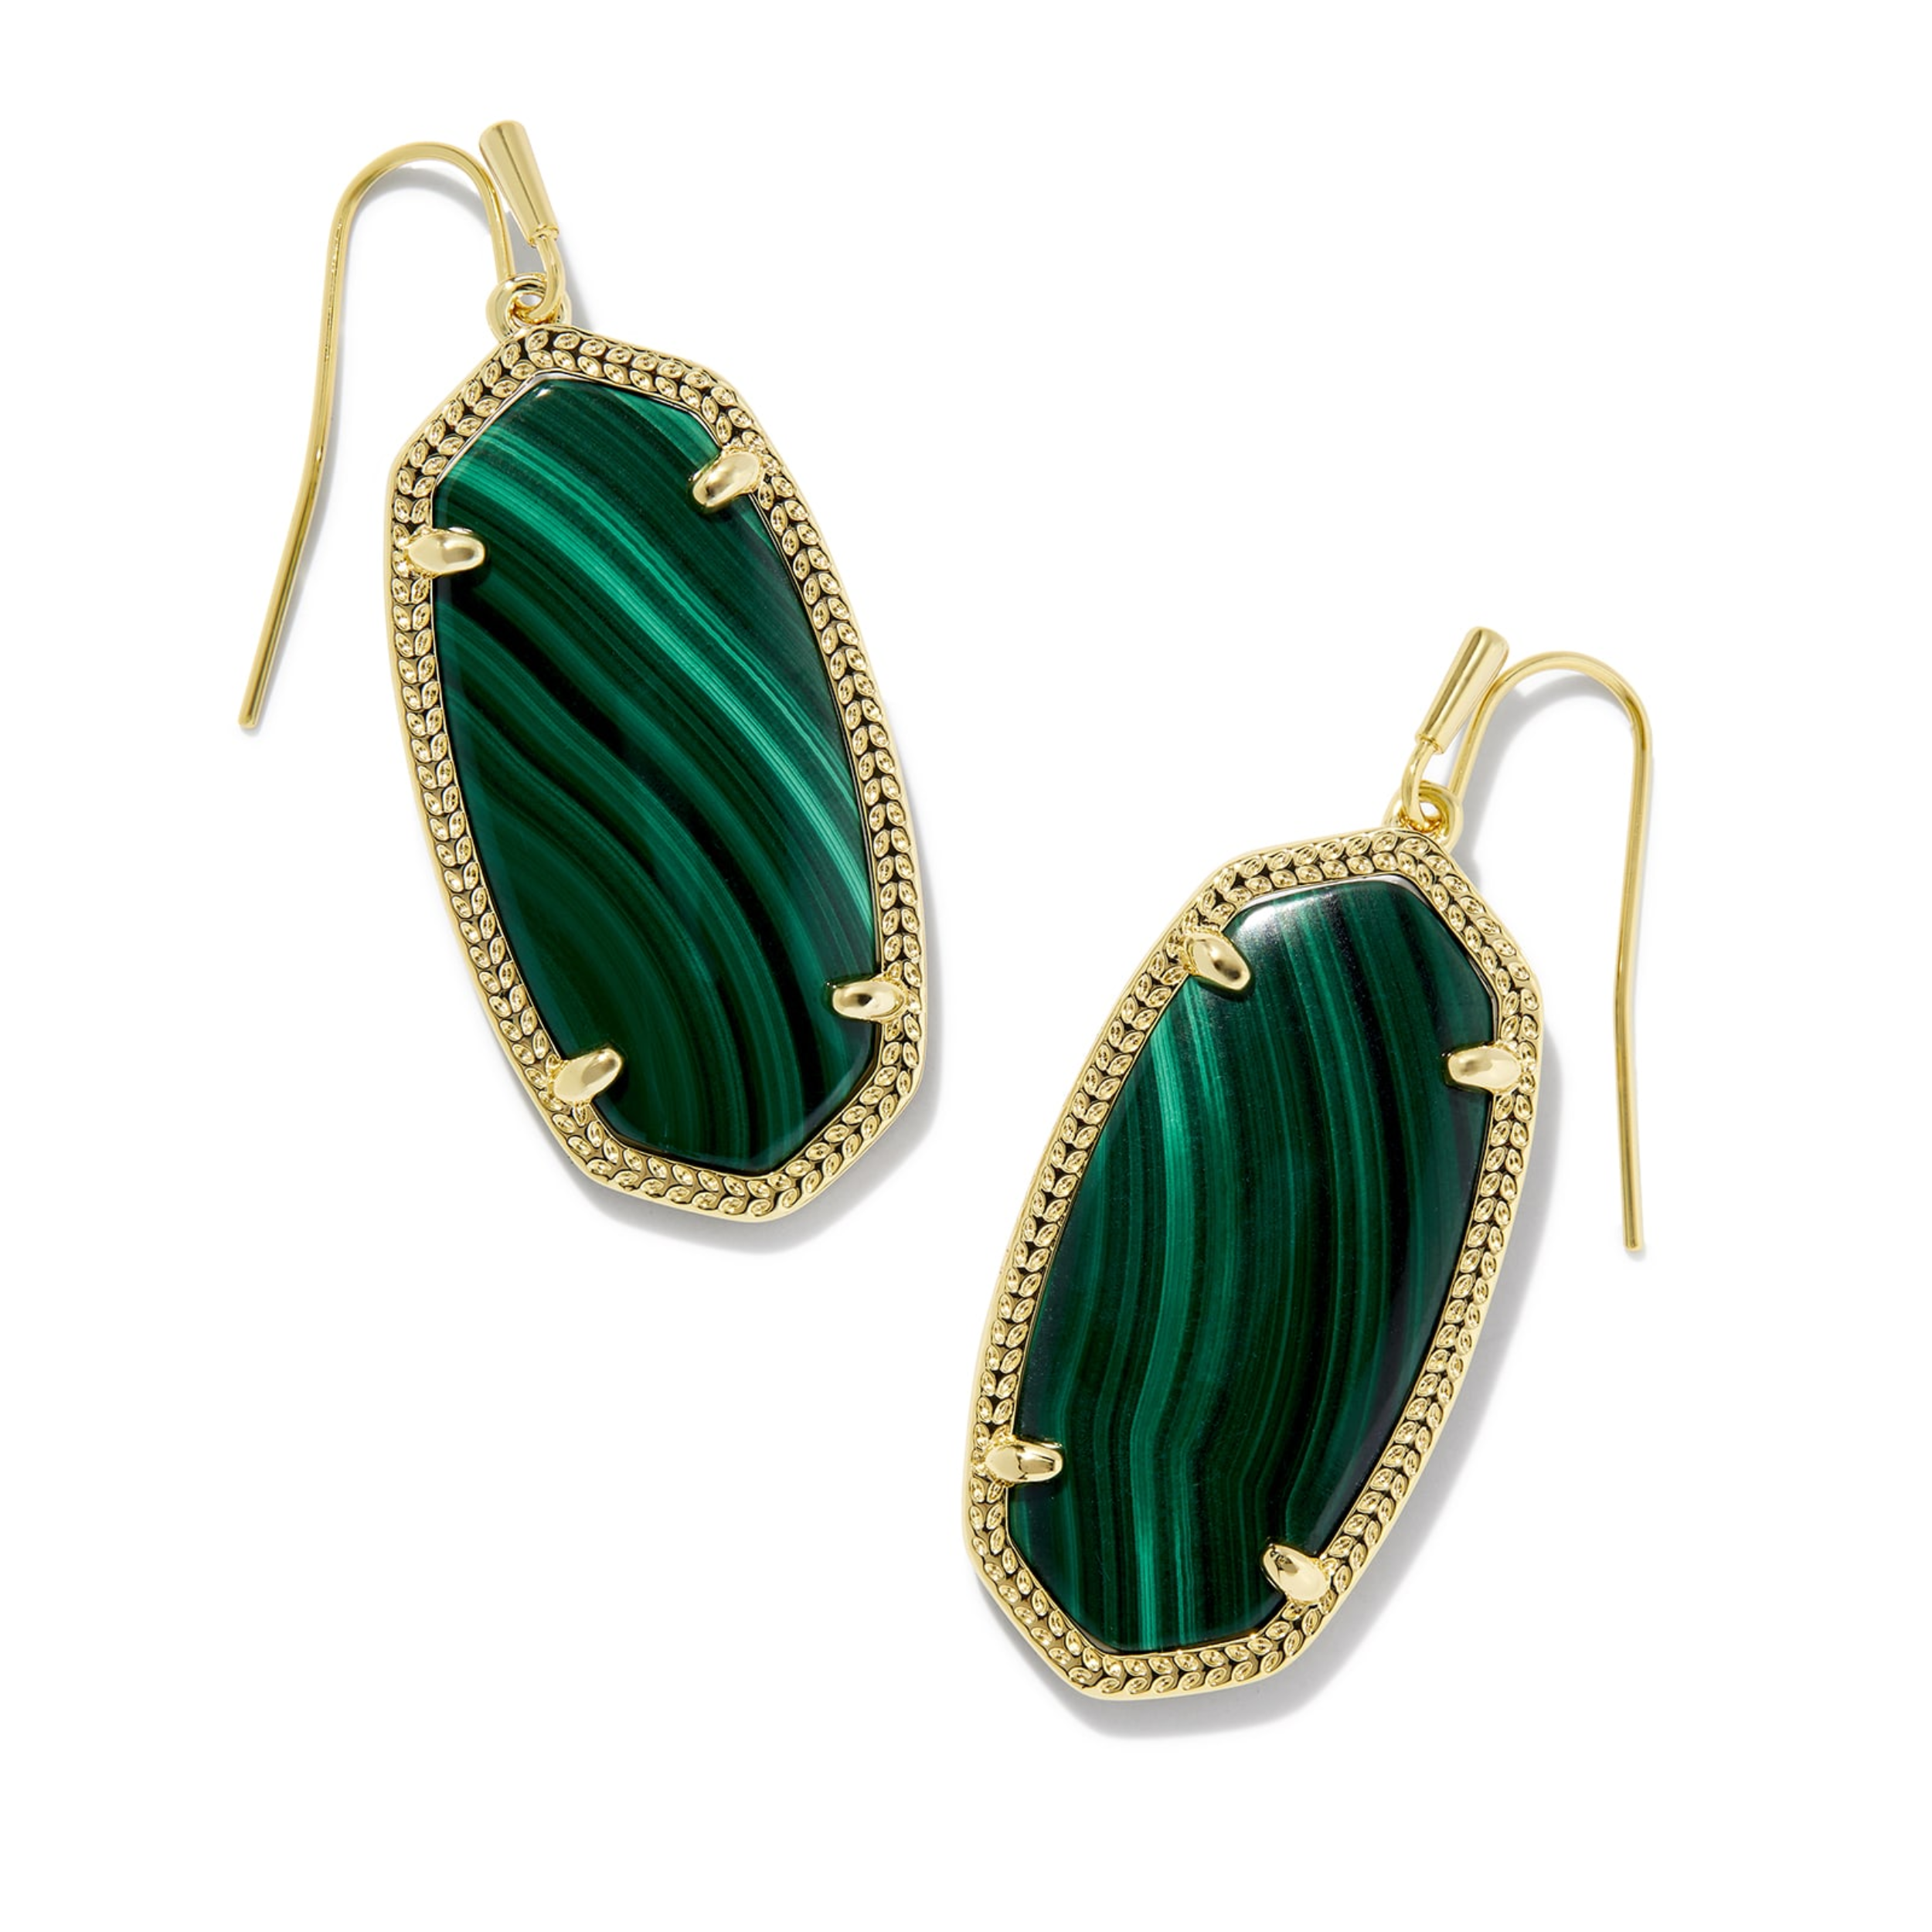 These Elle Gold Drop earrings in green Malachite by Kendra Scott are pictured on a white background.